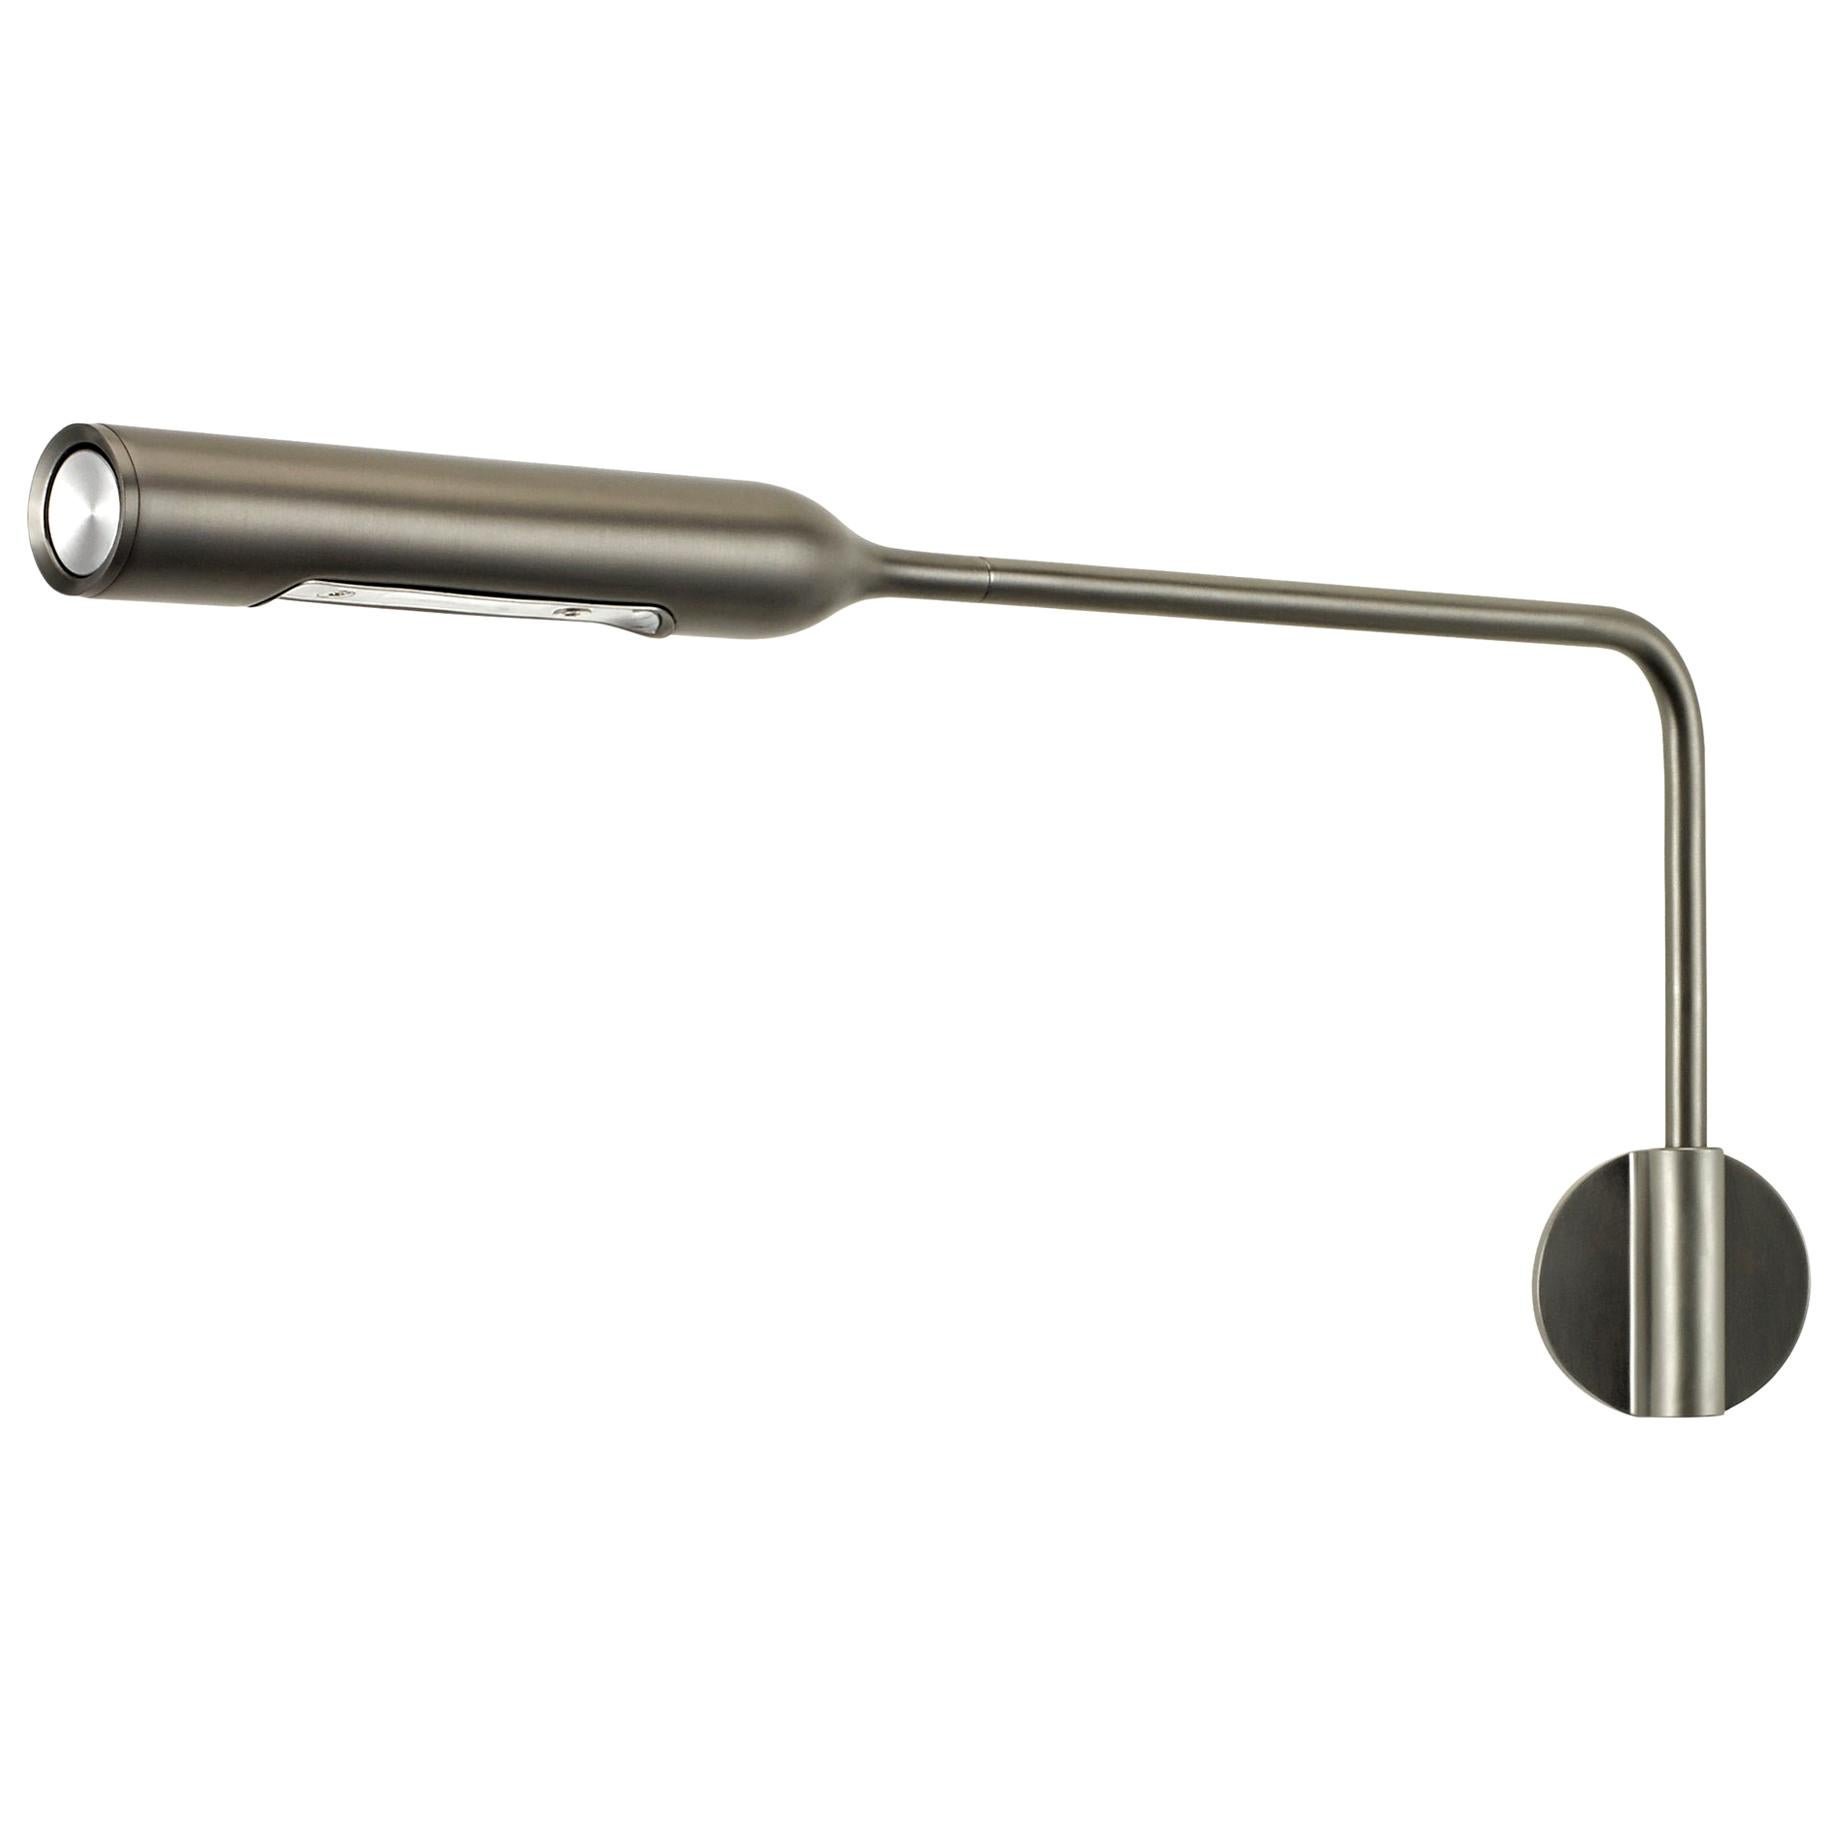 Lumina Flo Wall M Lamp in Gunmetal by Foster+Partners